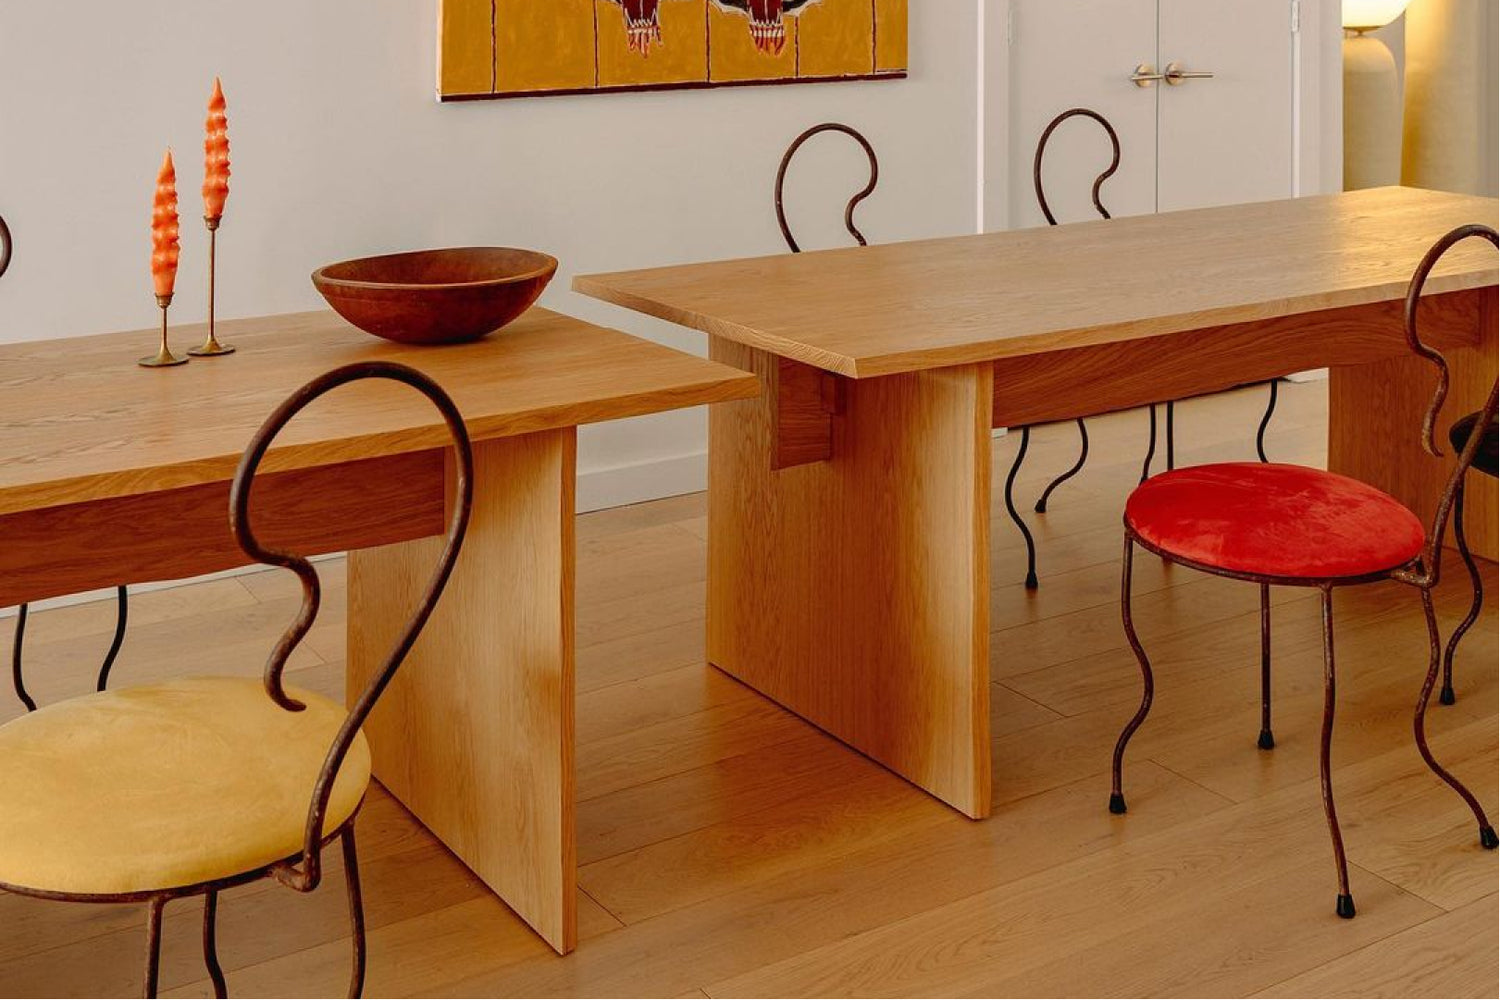 Hem - UGC of a dining room scene featuring Bookmatch Tables in Oak.